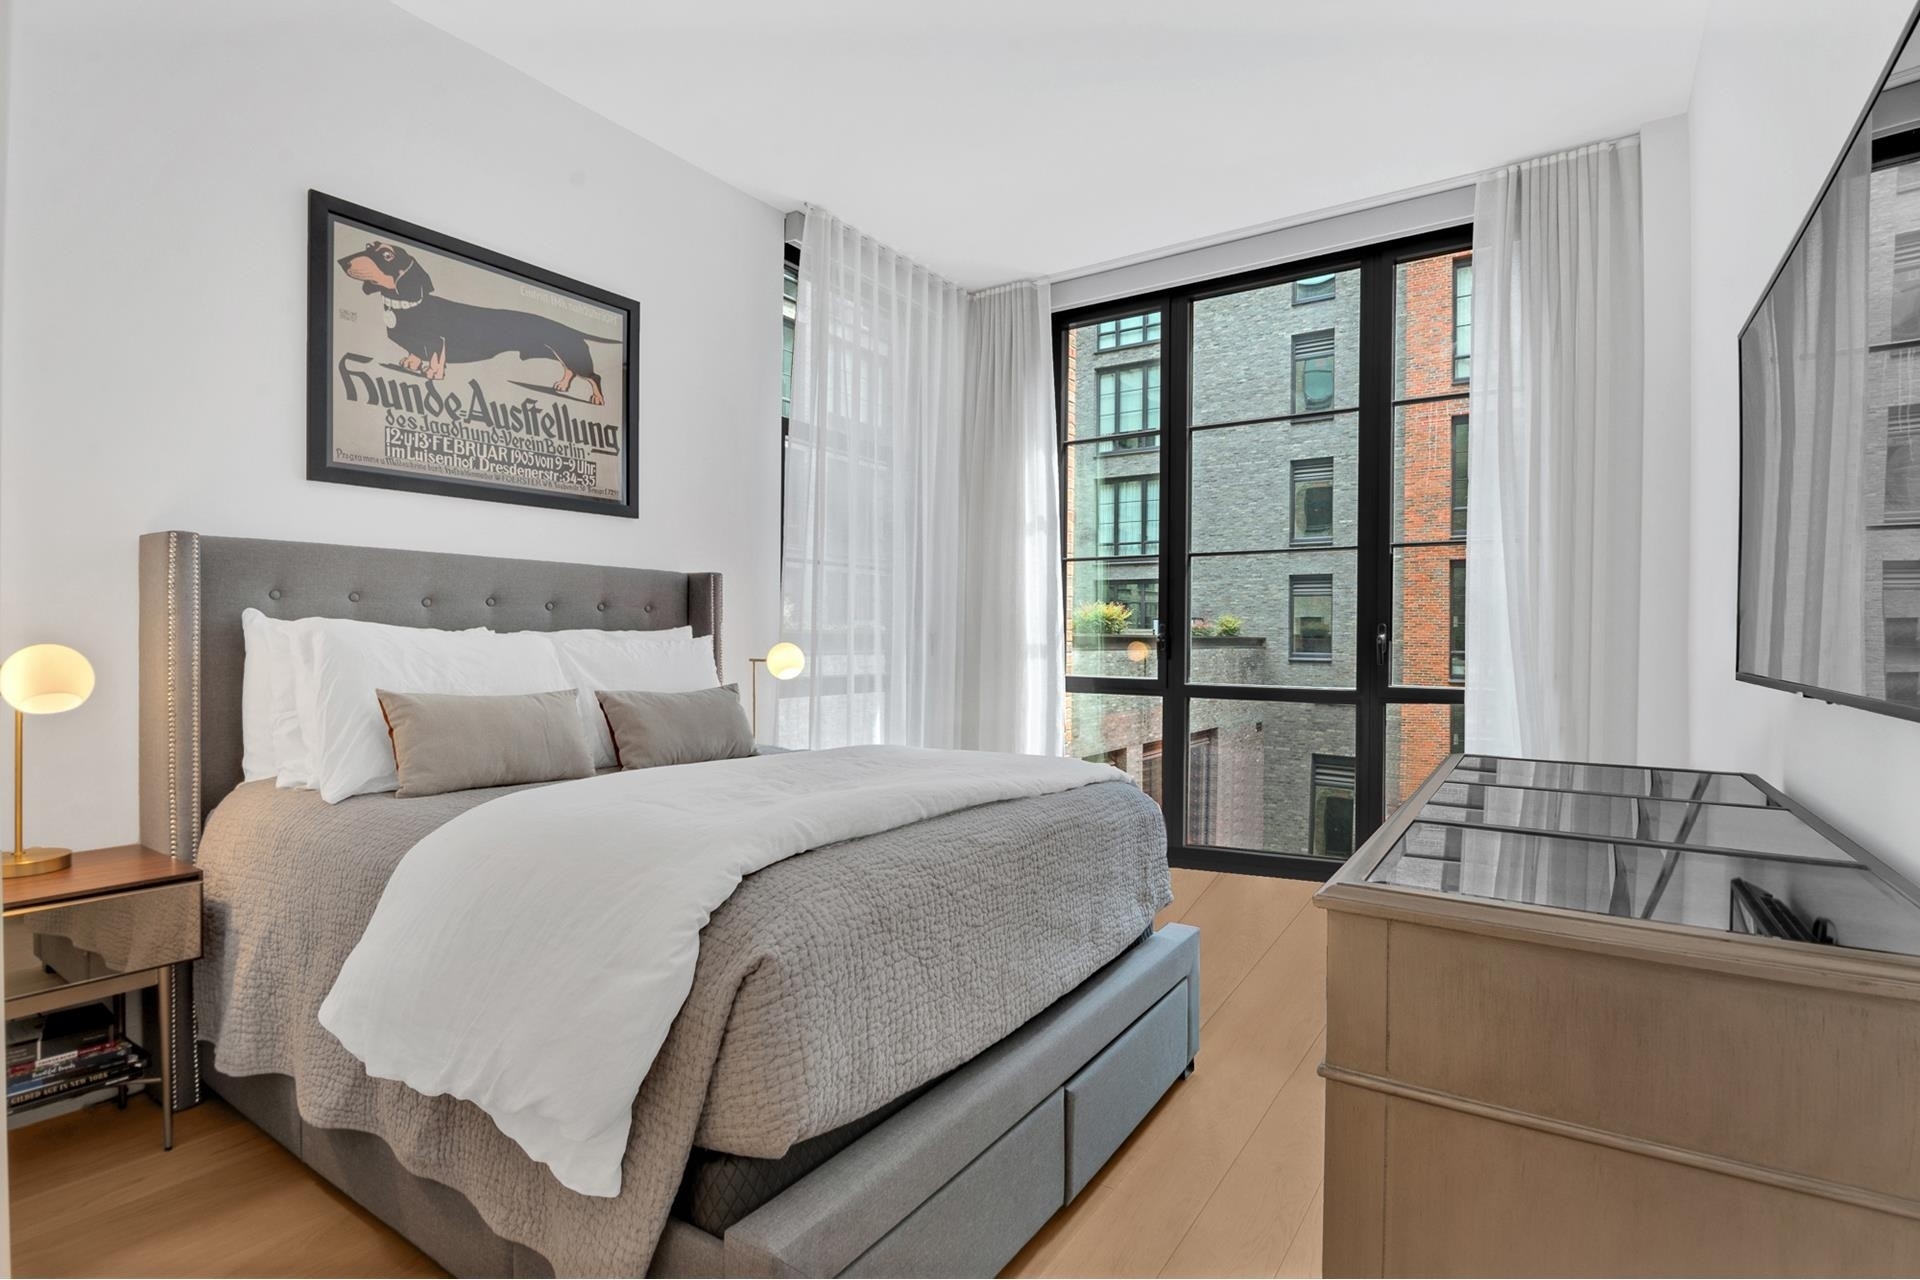 5. Condominiums for Sale at Steiner East Villag, 438 E 12TH ST, 3E East Village, New York, NY 10009